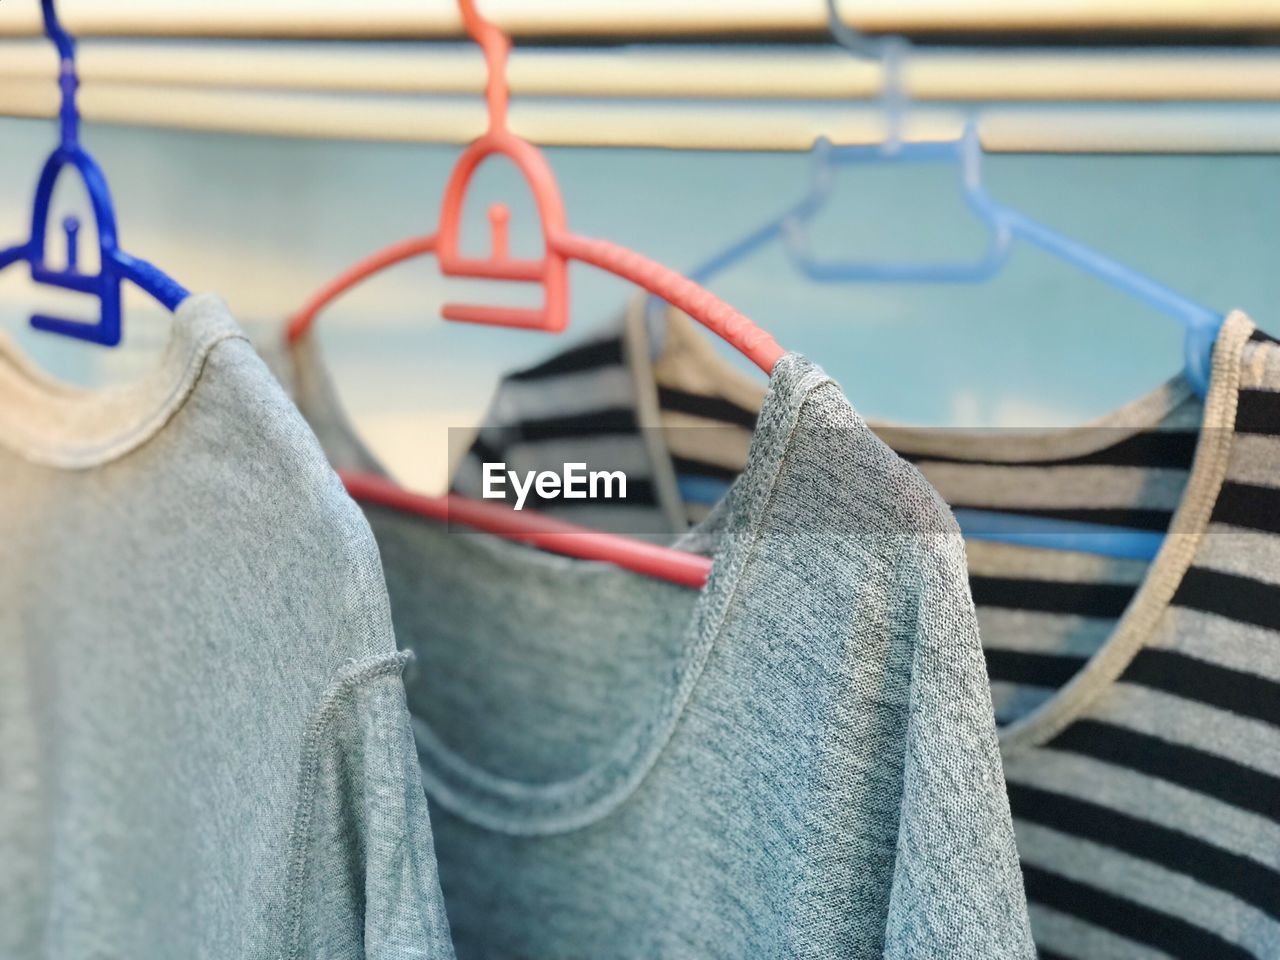 CLOSE-UP OF CLOTHES HANGING ON CLOTHESLINE AGAINST BLURRED BACKGROUND